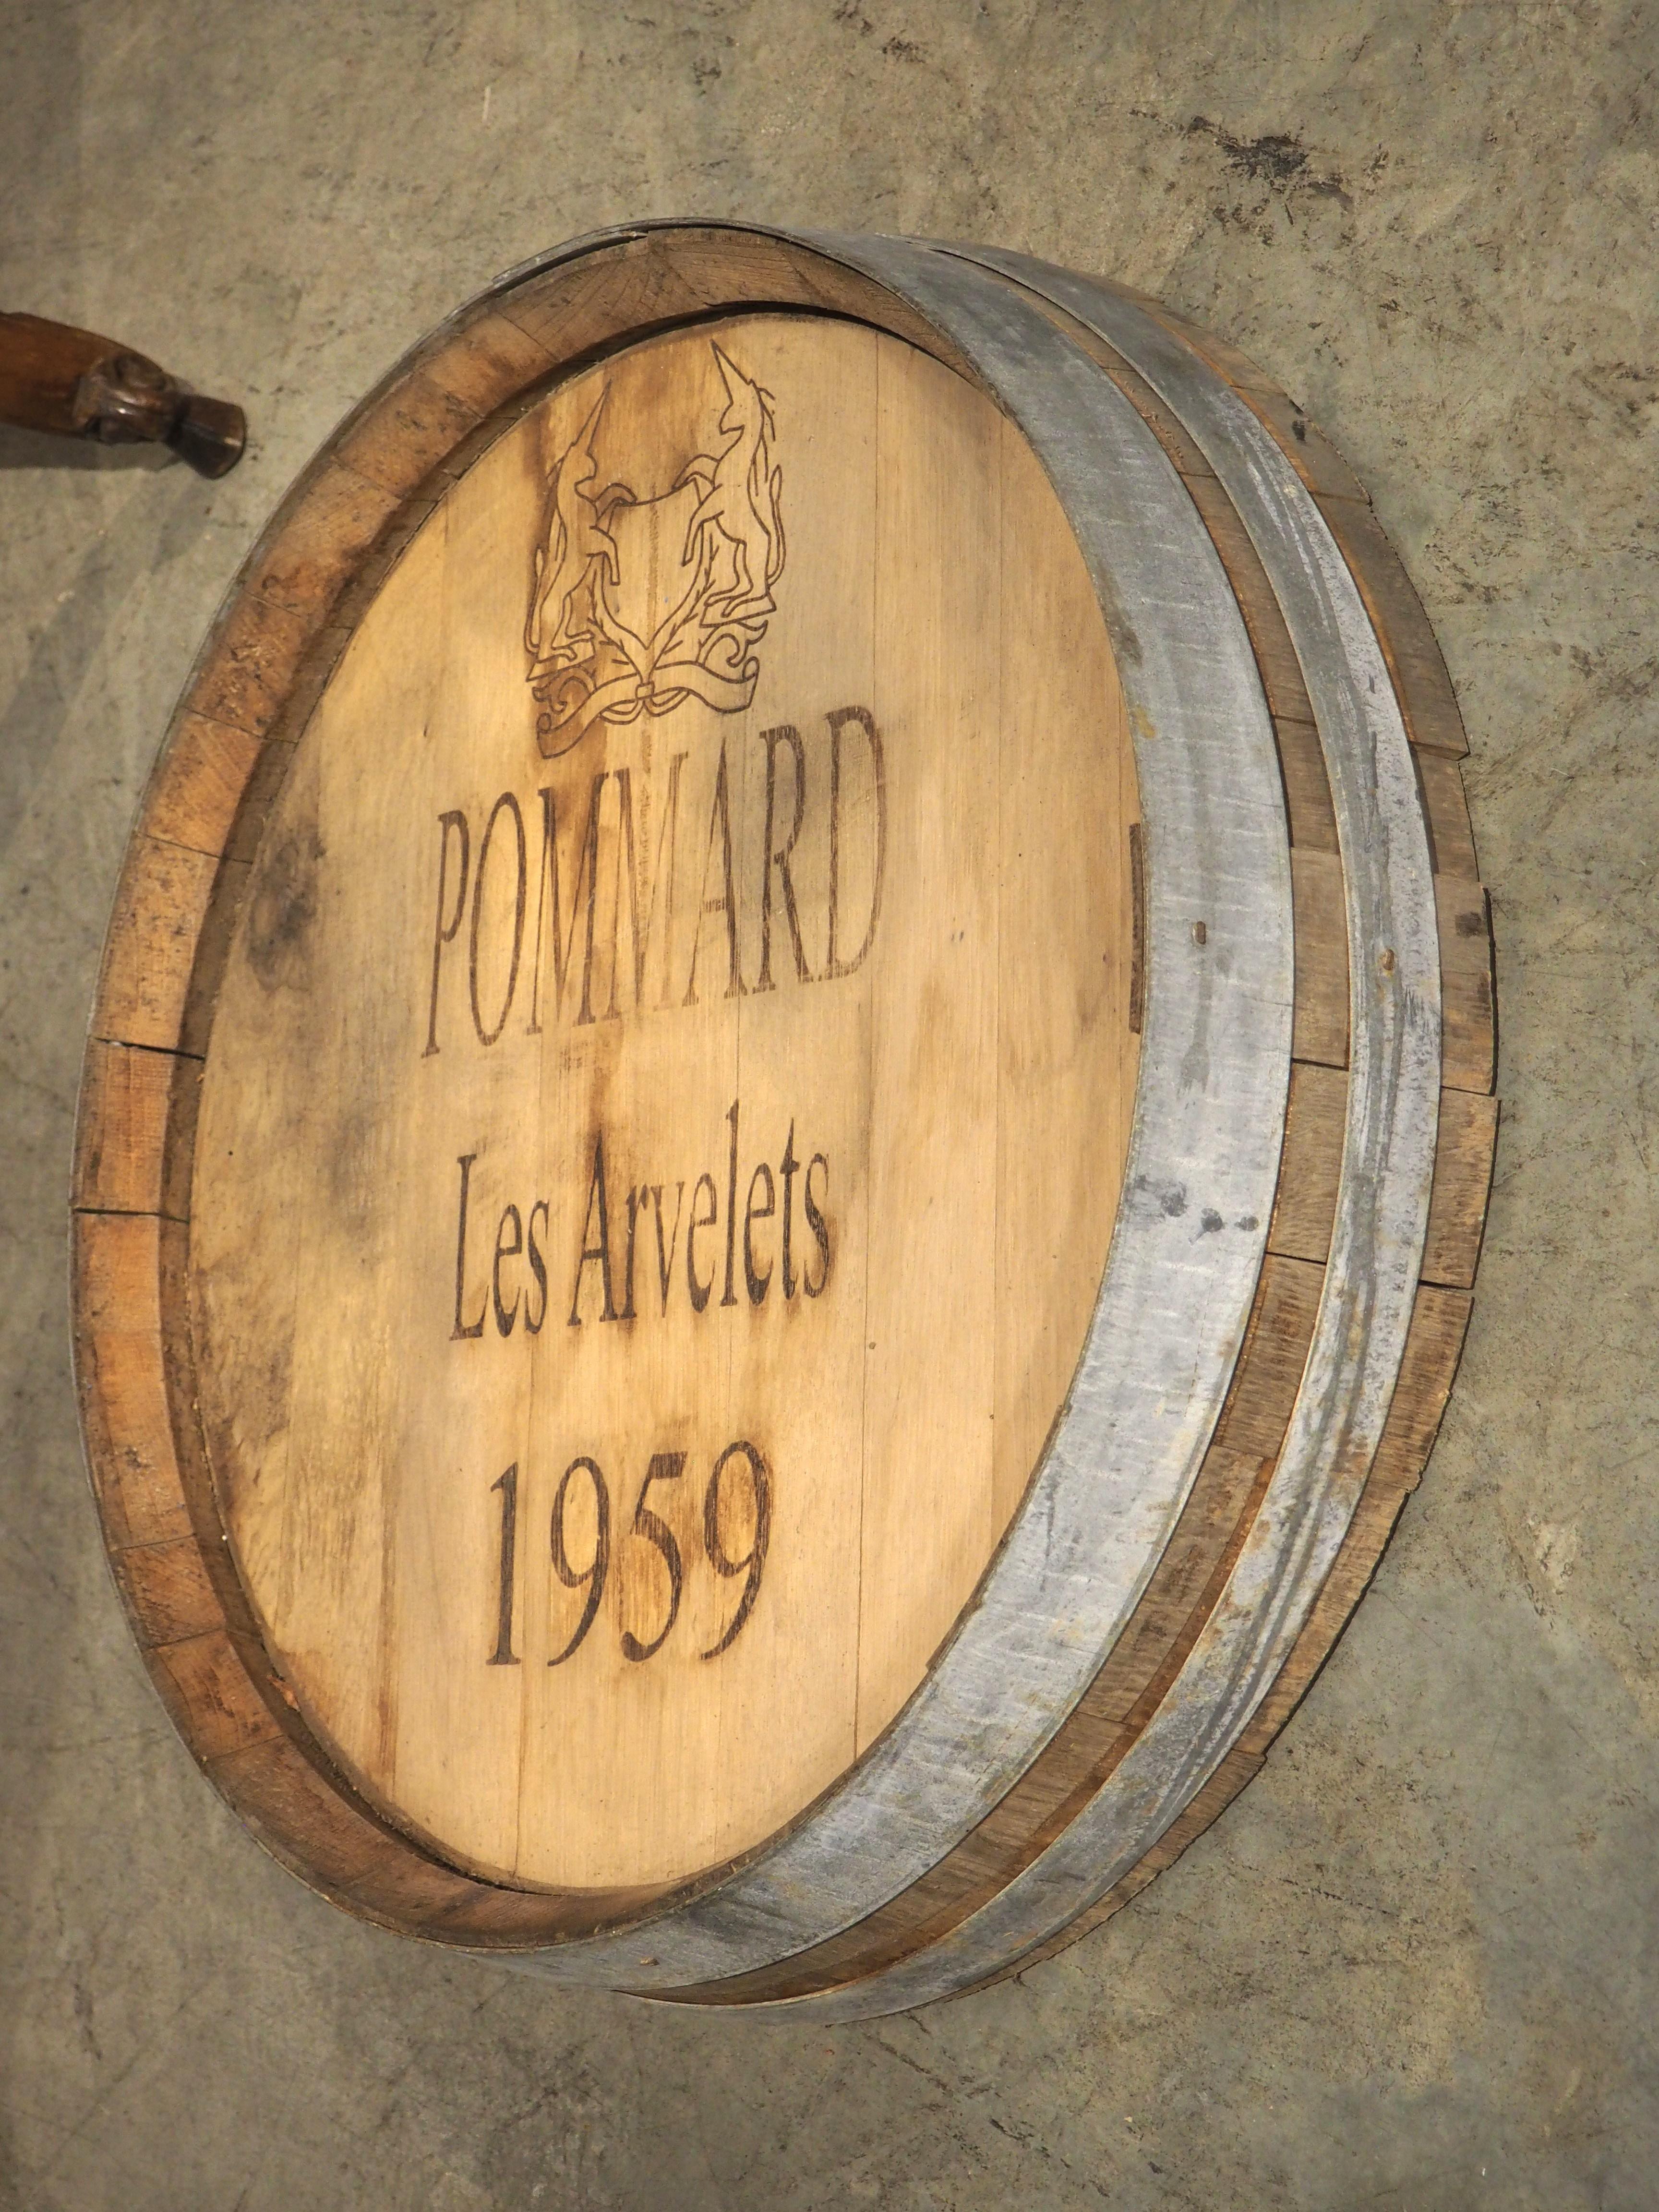 Originally the head of a French oak wine barrel, dated 1959, this wine barrel frontage is a perfect wall-mounted accessory for a bar room or wine cellar. The beige facade has been painted brown with the appellation and stylized label of a wine